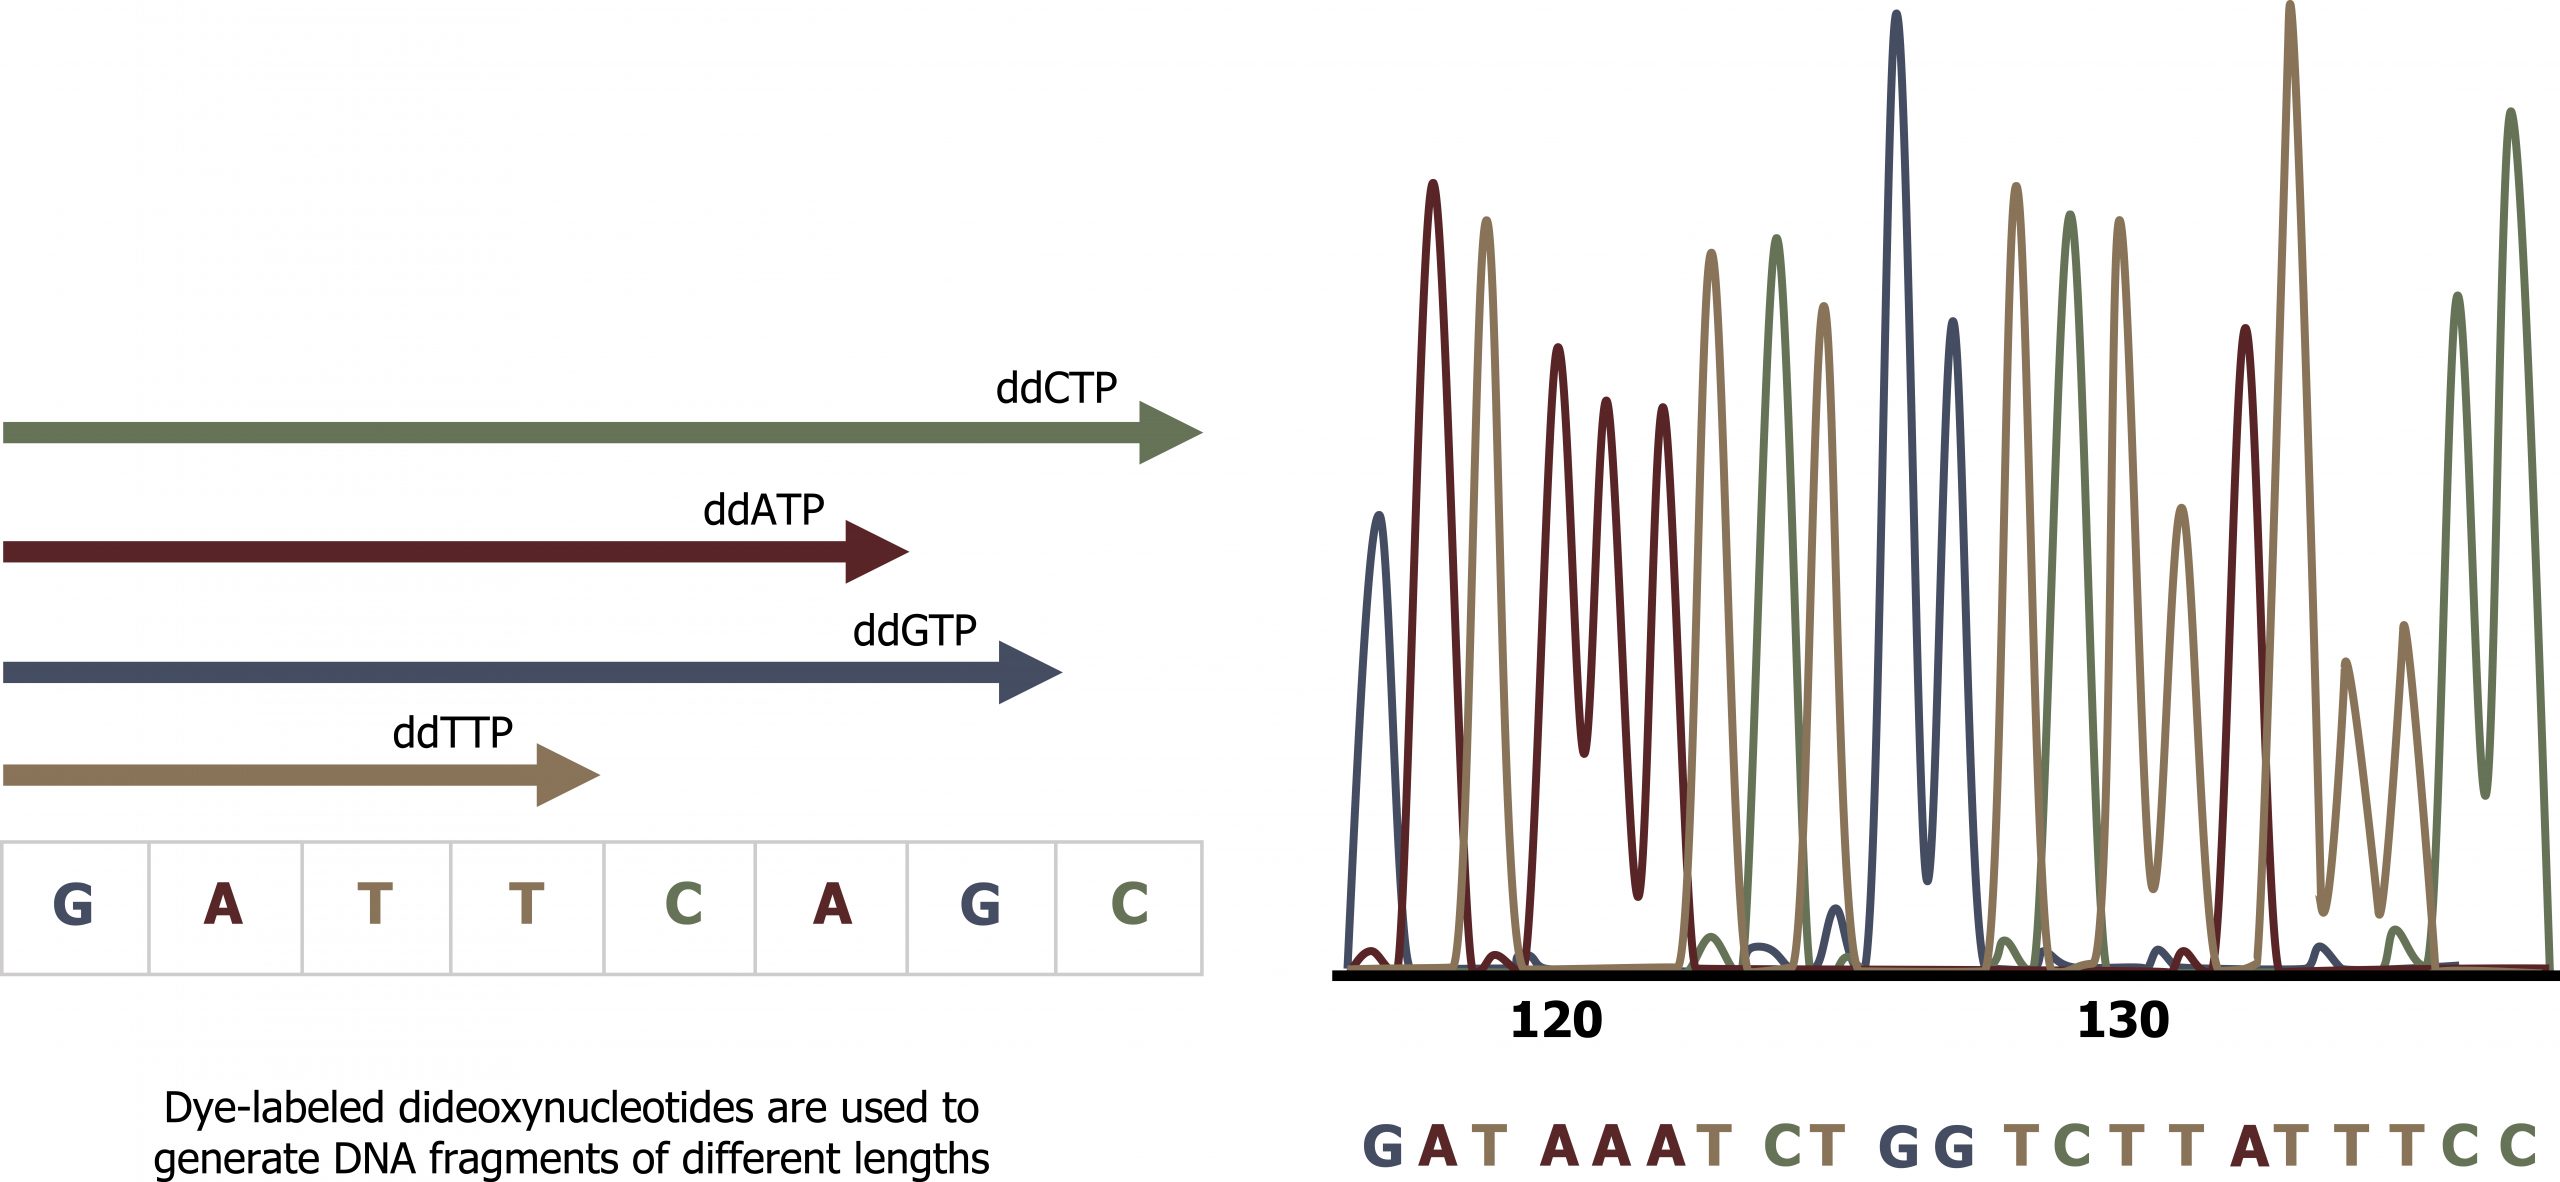 Dye-labeled dideoxynucleotides are used to generate DNA fragments of different lengths. DNA sequence GATTCAGC with yellow arrow labeled ddTTP above second T, blue arrow labeled ddGTP above second G, red arrow labeled ddATP above second A, green arrow labeled ddCTP above second C. Graph with colored peaks correlating to the previously described color scheme to correspond to DNA sequence GATAAATCTGGTCTTATTTCC.